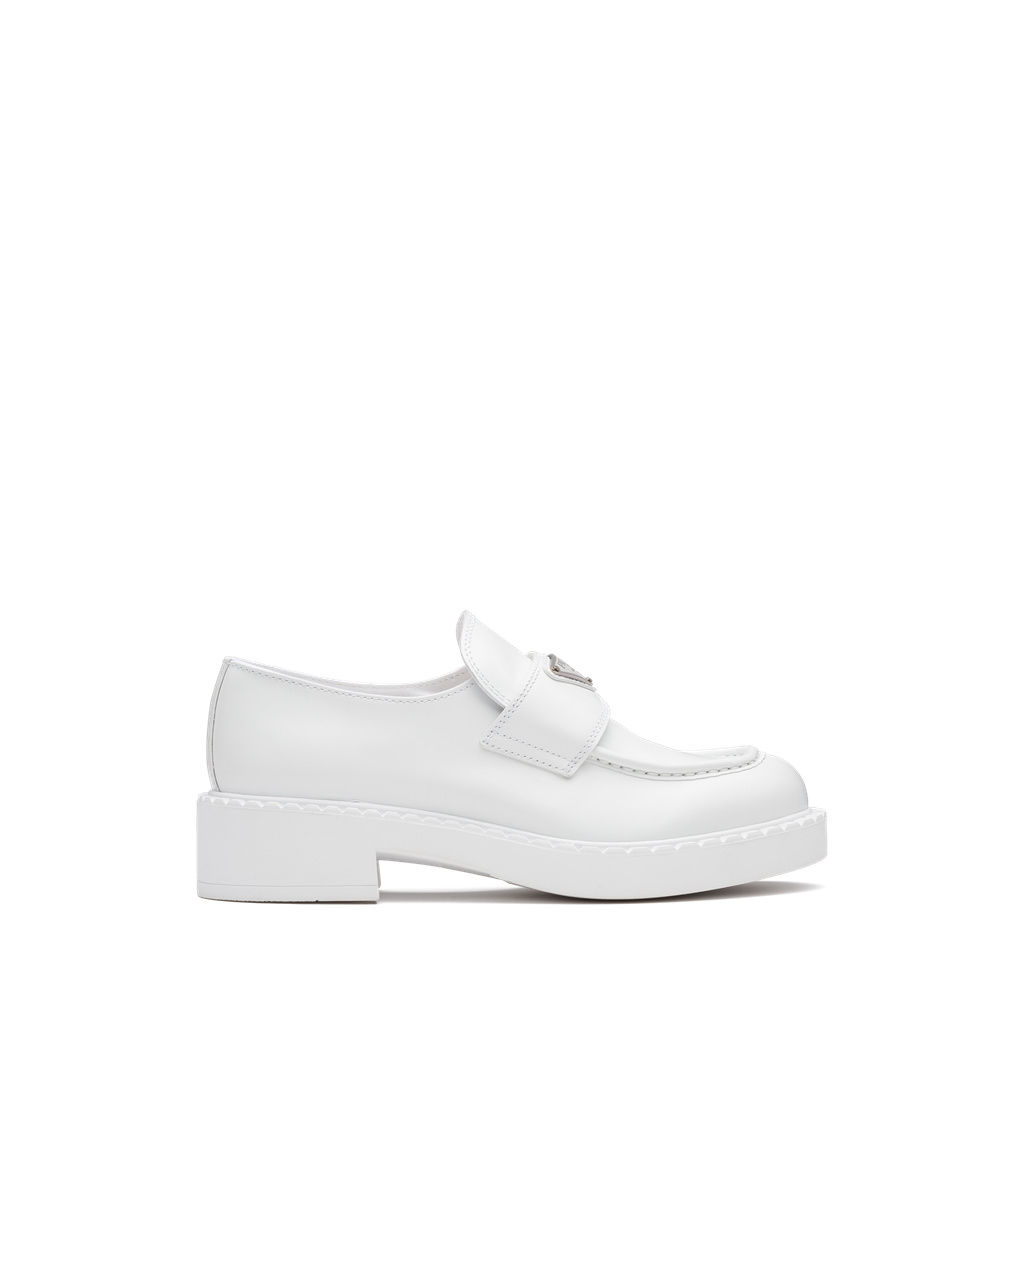 Prada Loafers For Sale - Chocolate Brushed Leather Loafers Womens White